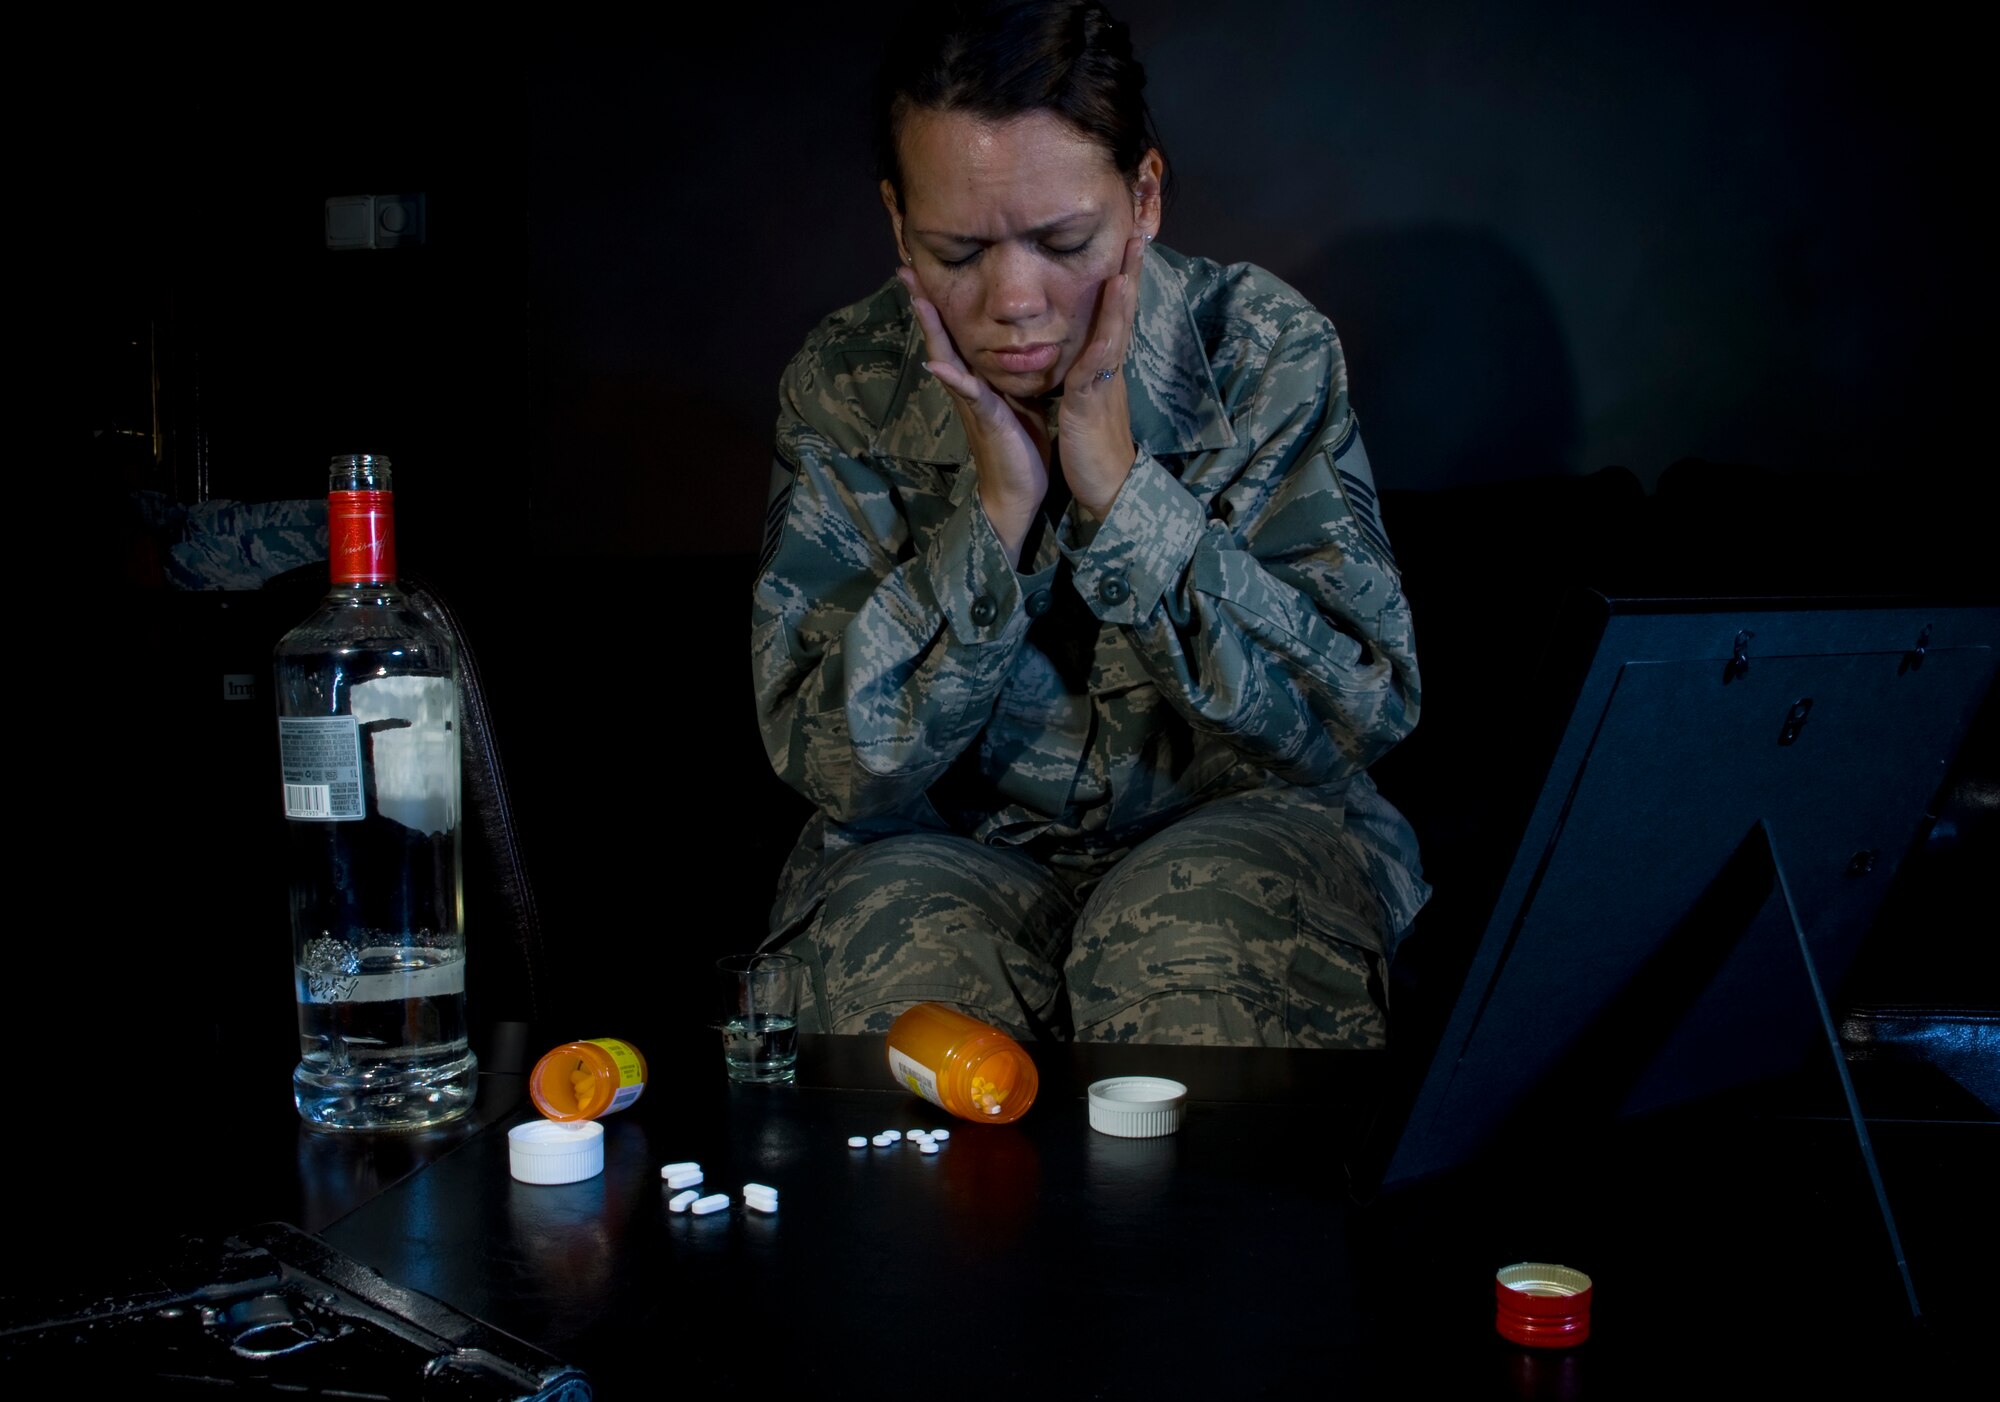 U.S. Air Forces in Europe leadership has called on every Airman to be a “sensor” – to be on the lookout for fellow Airmen who might be showing signs of suicidal intentions. All Airmen are encouraged to seek help for themselves or others by contacting mental health, a chaplain, a supervisor, first sergeant or commander. (U.S. Air Force photo by Staff Sgt. Eric Summers/Released)